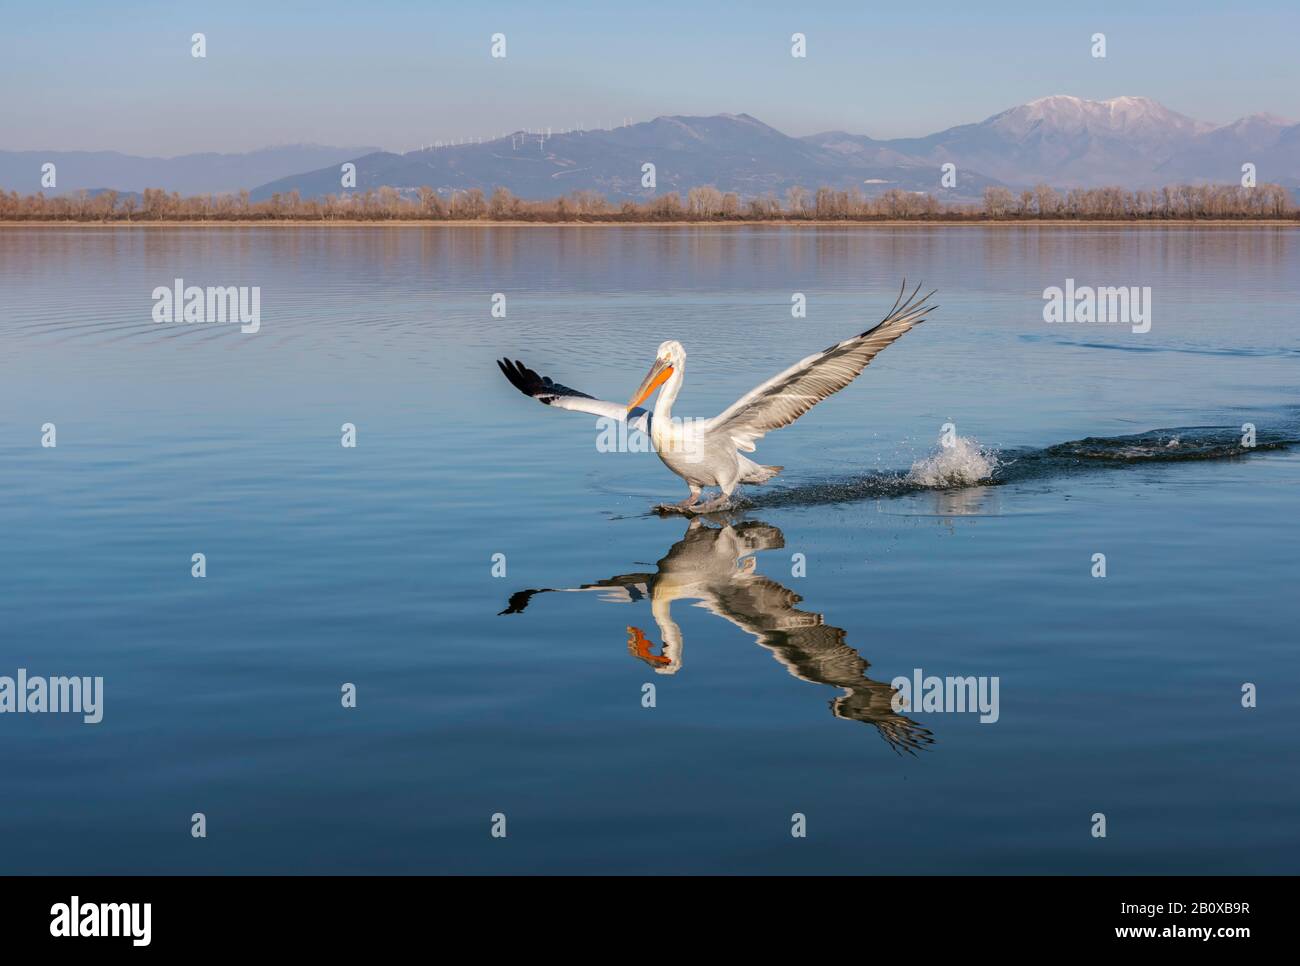 Dalmatian Pelican (Pelecanus crispus) reflected in and just about to land on Lake Kerkini, Northern Greece. Stock Photo